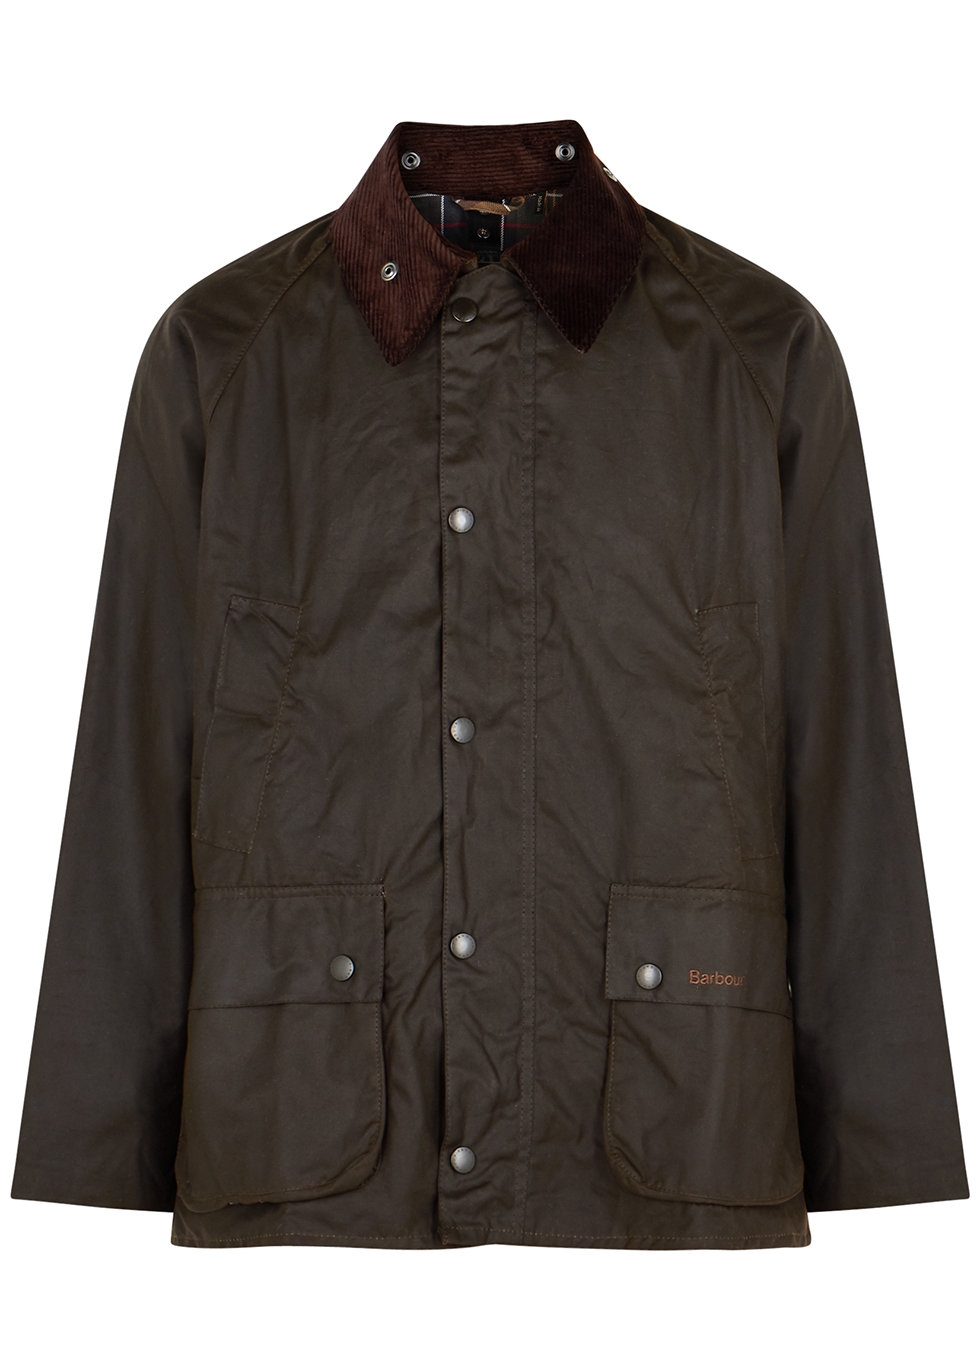 Barbour Bedale dark olive waxed cotton 